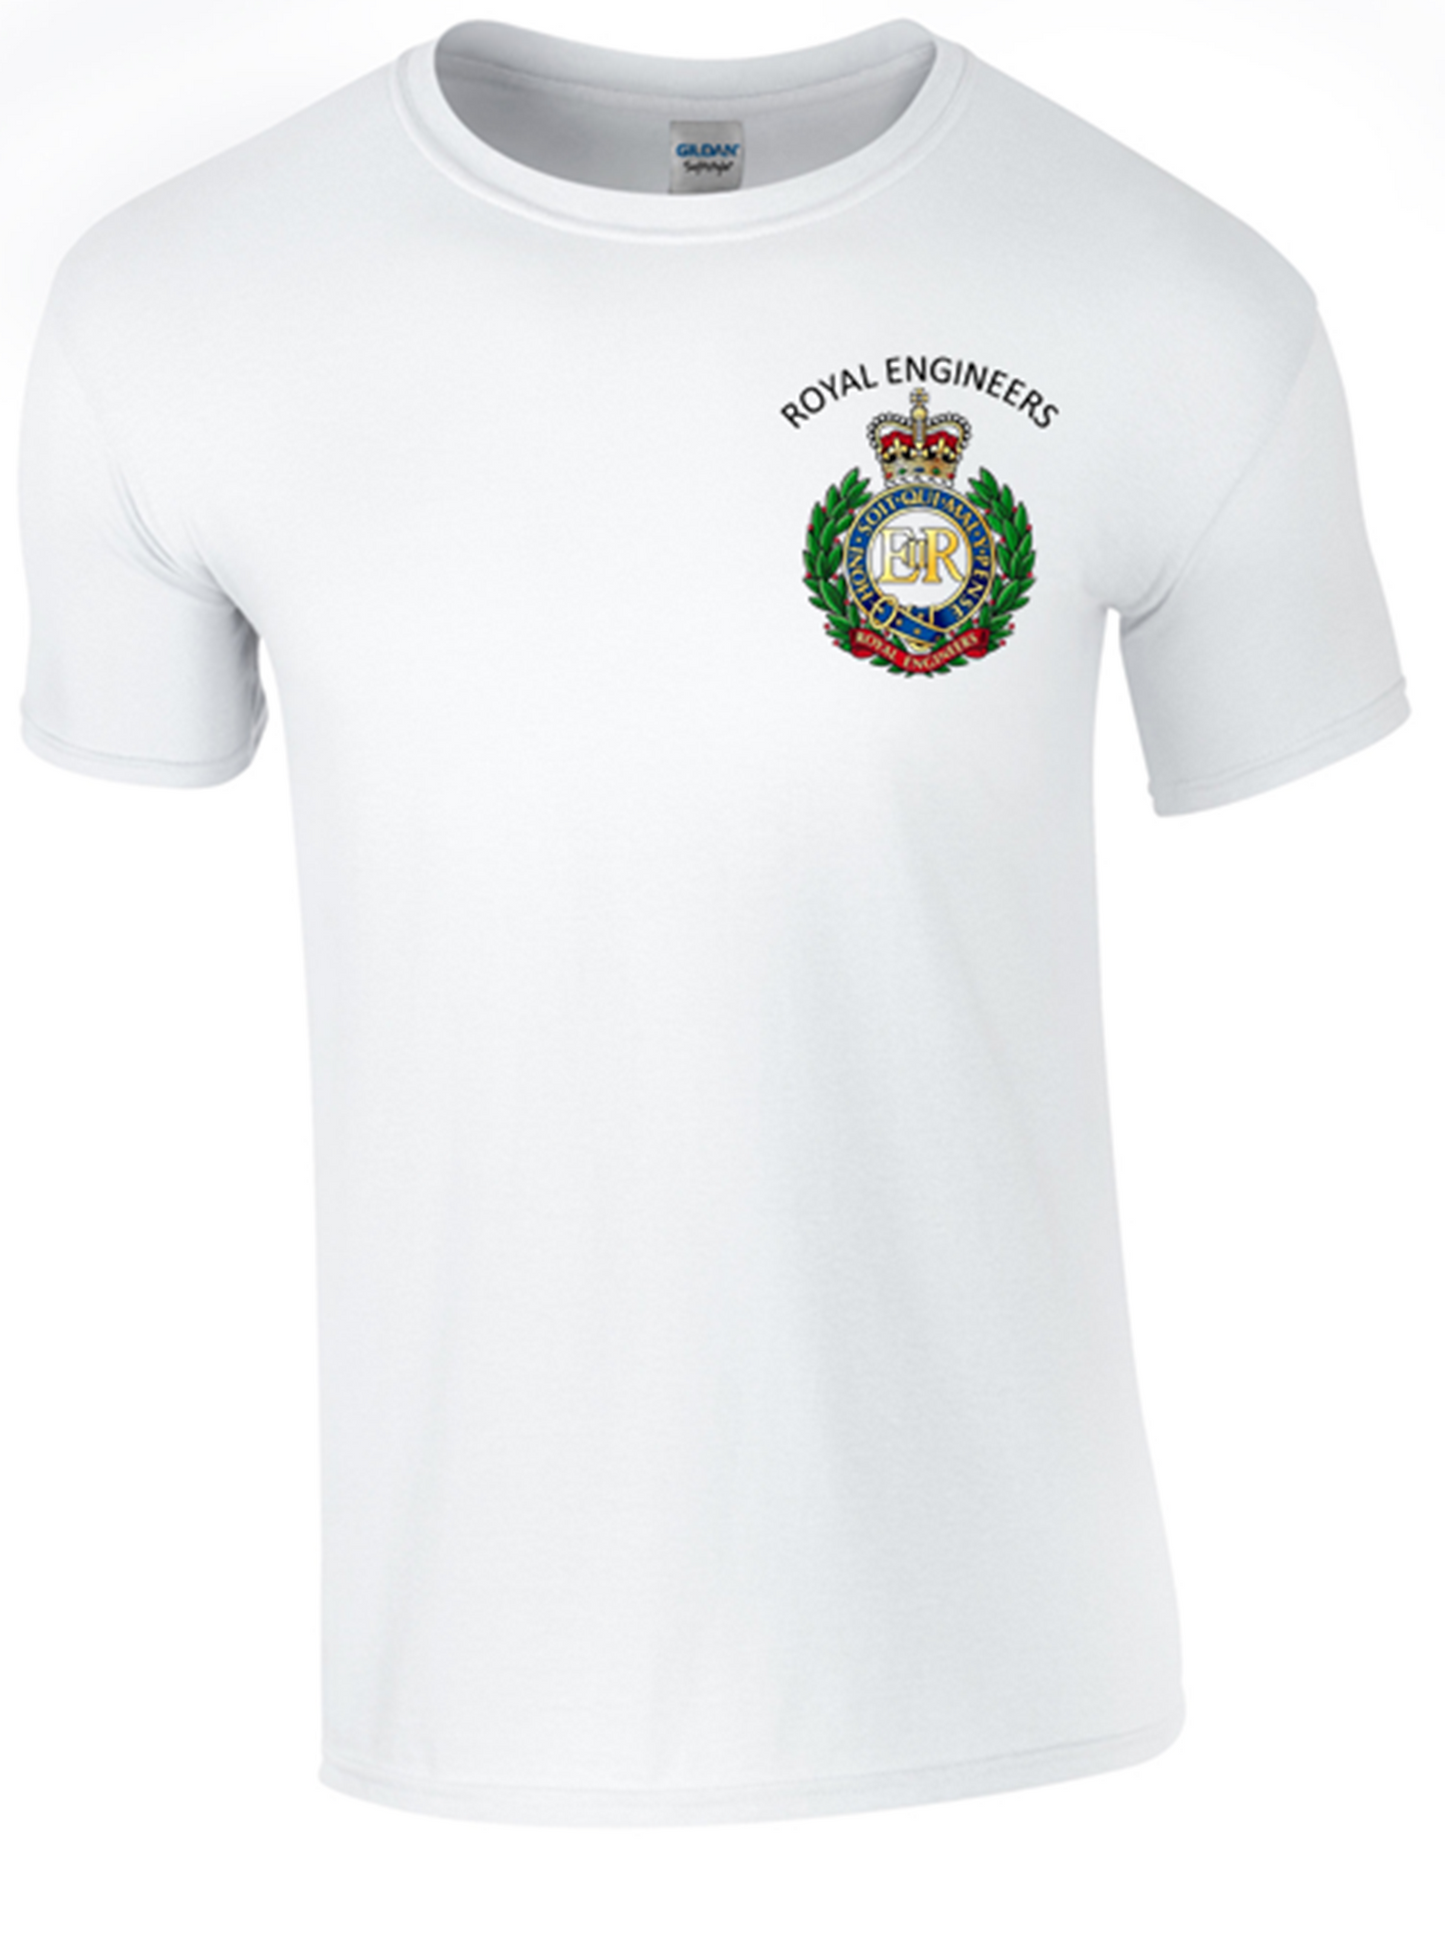 Royal Engineers T-Shirt Front Logo only Official MOD Approved Merchandise - Army 1157 kit White / L Army 1157 Kit Veterans Owned Business